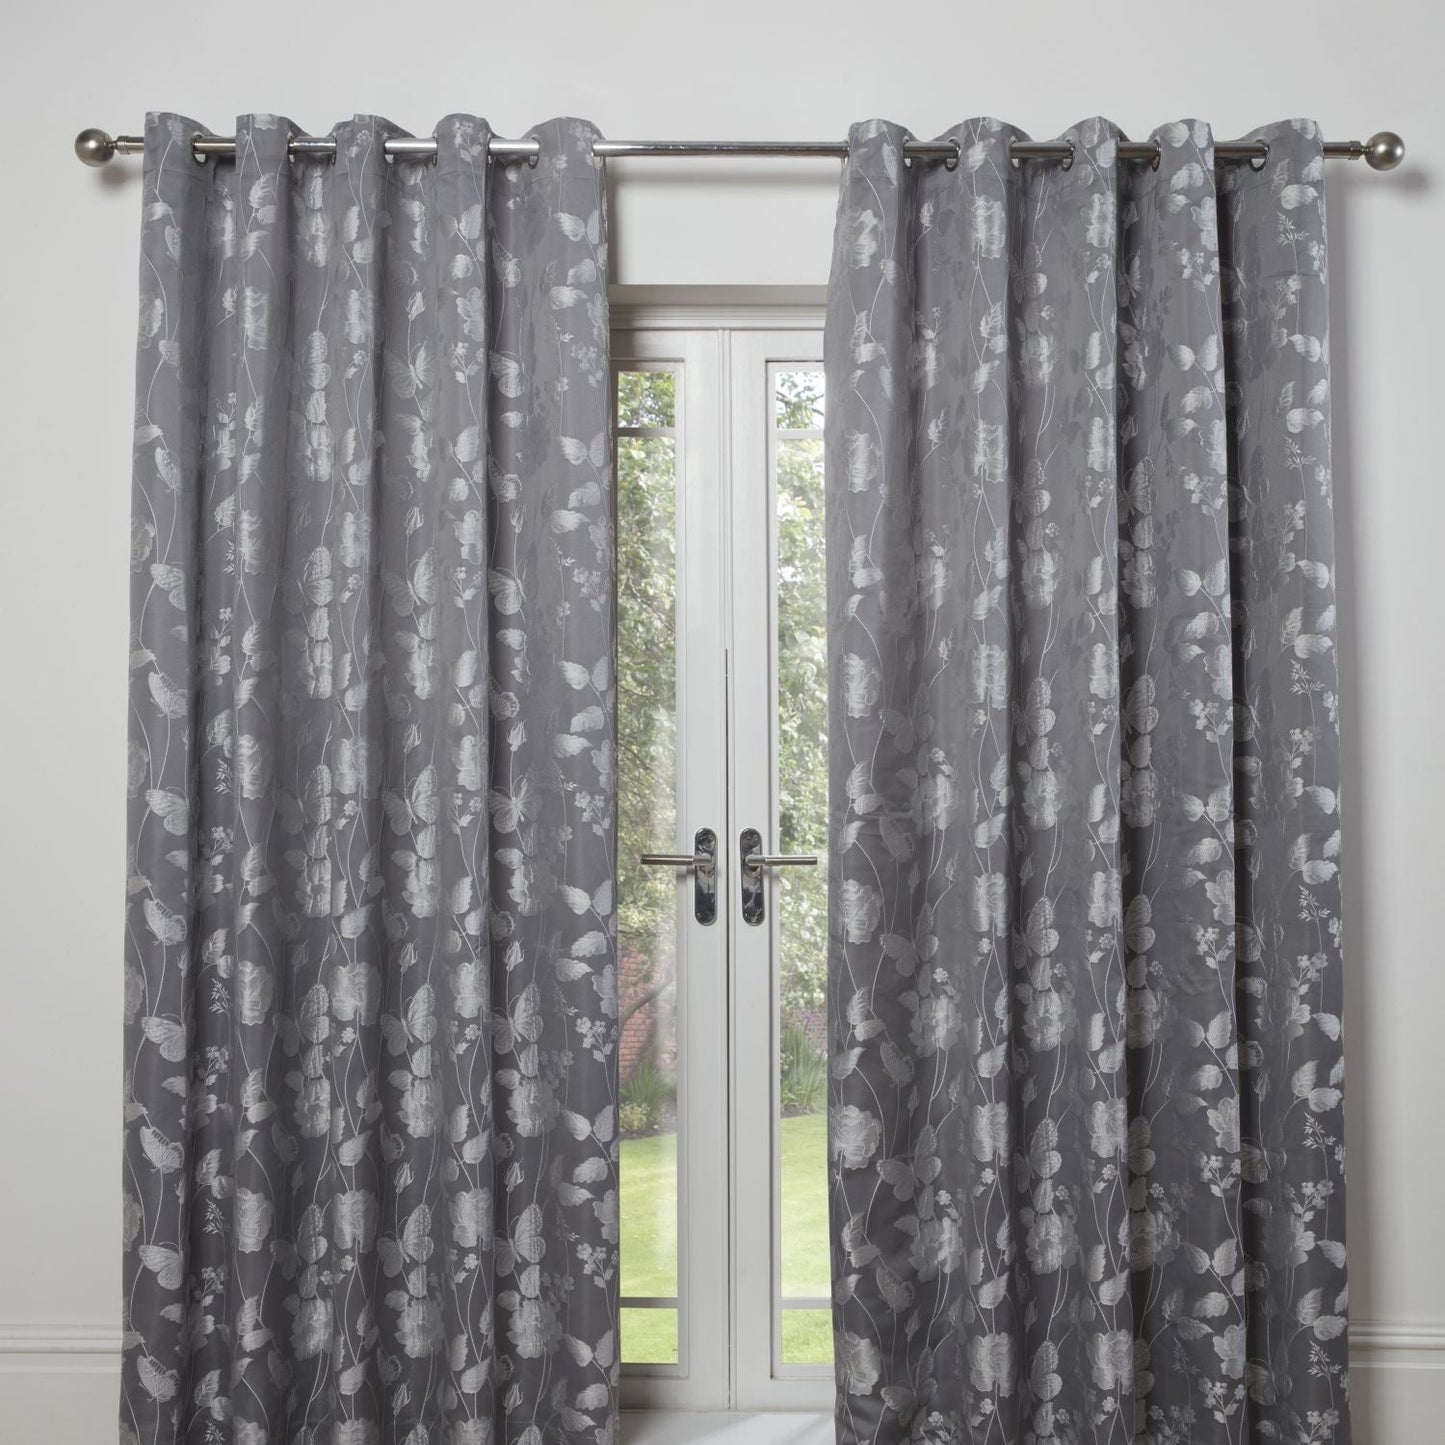 Butterfly Meadow Silver Grey Lined Eyelet Jacquard Curtains